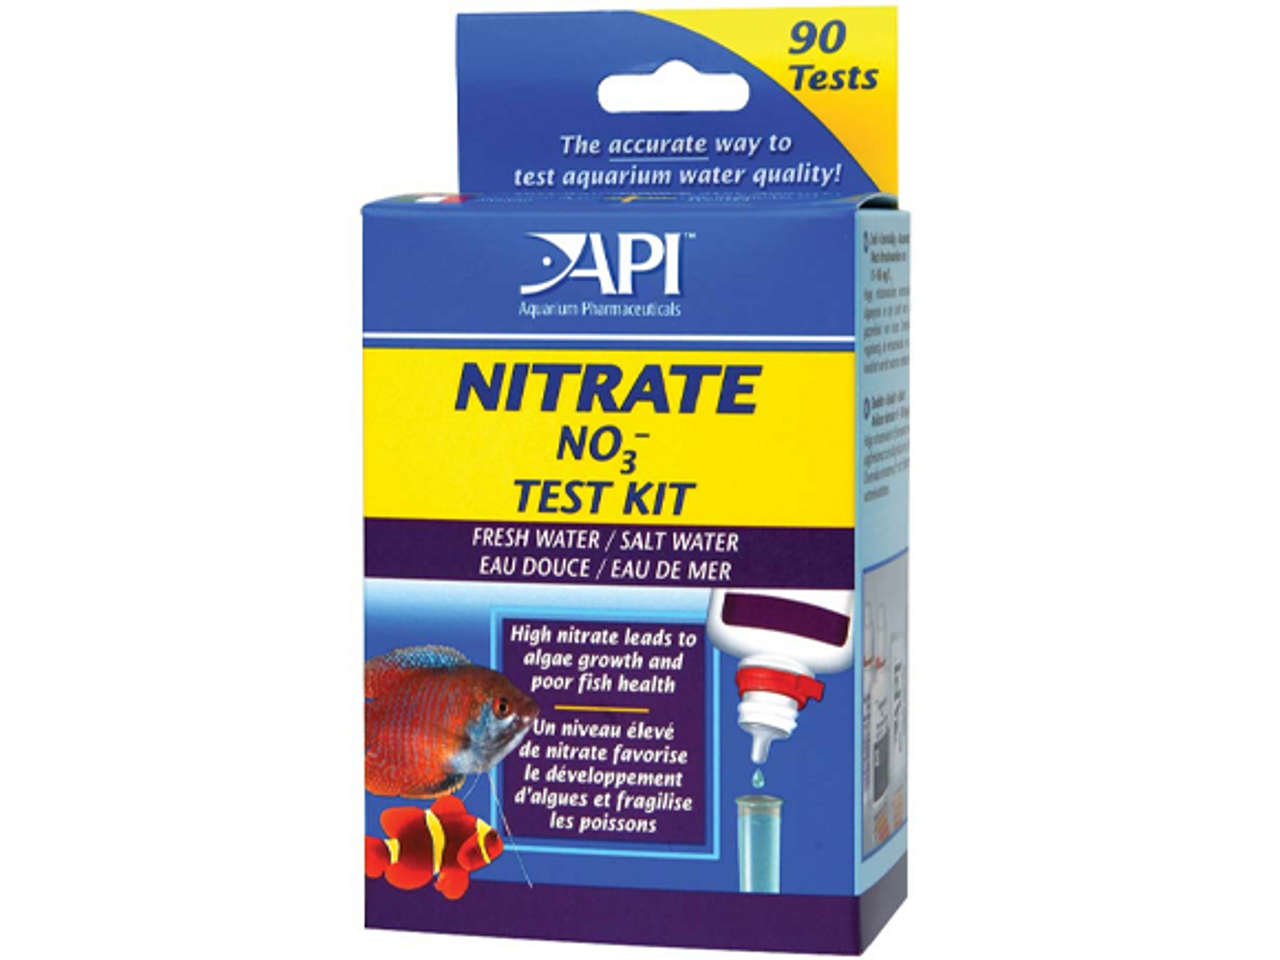 https://cdn11.bigcommerce.com/s-ldfio/images/stencil/1280x1280/products/2449/7642/API-Nitrate-Test-Kit-Freshwater-and-Saltwater-90-Tests__50420.1644524469.png?c=2